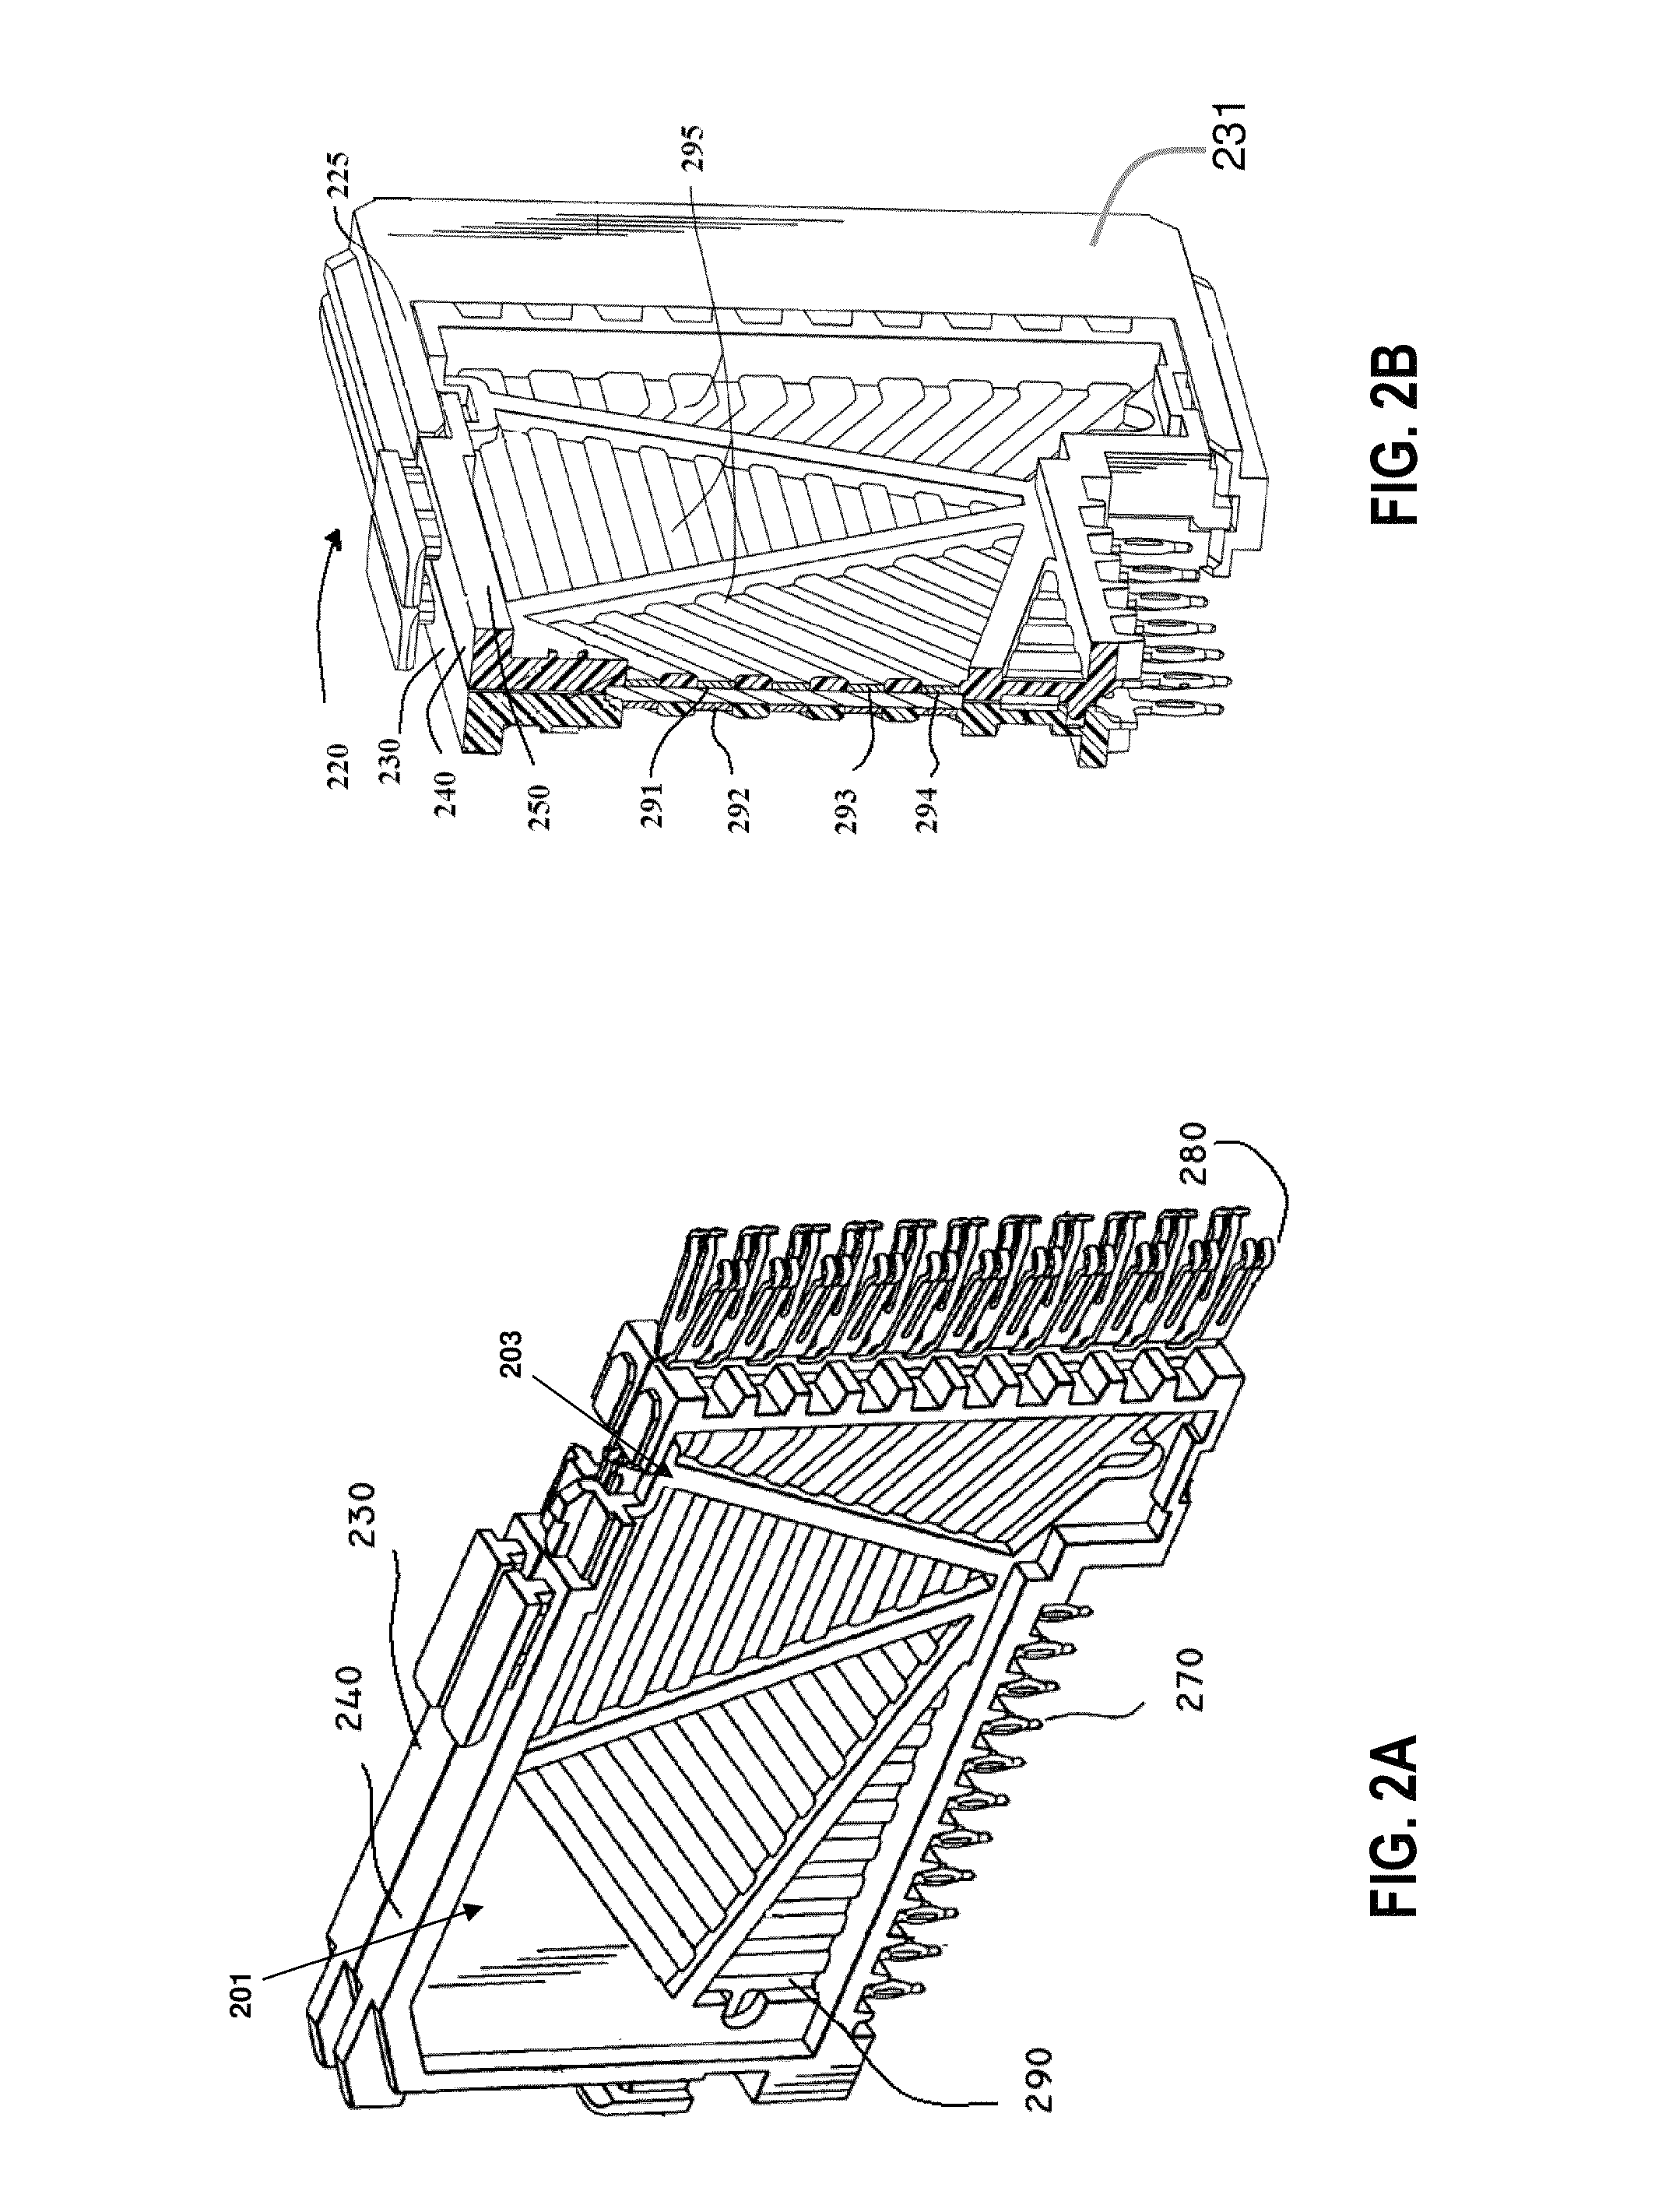 Electrical connector with hybrid shield